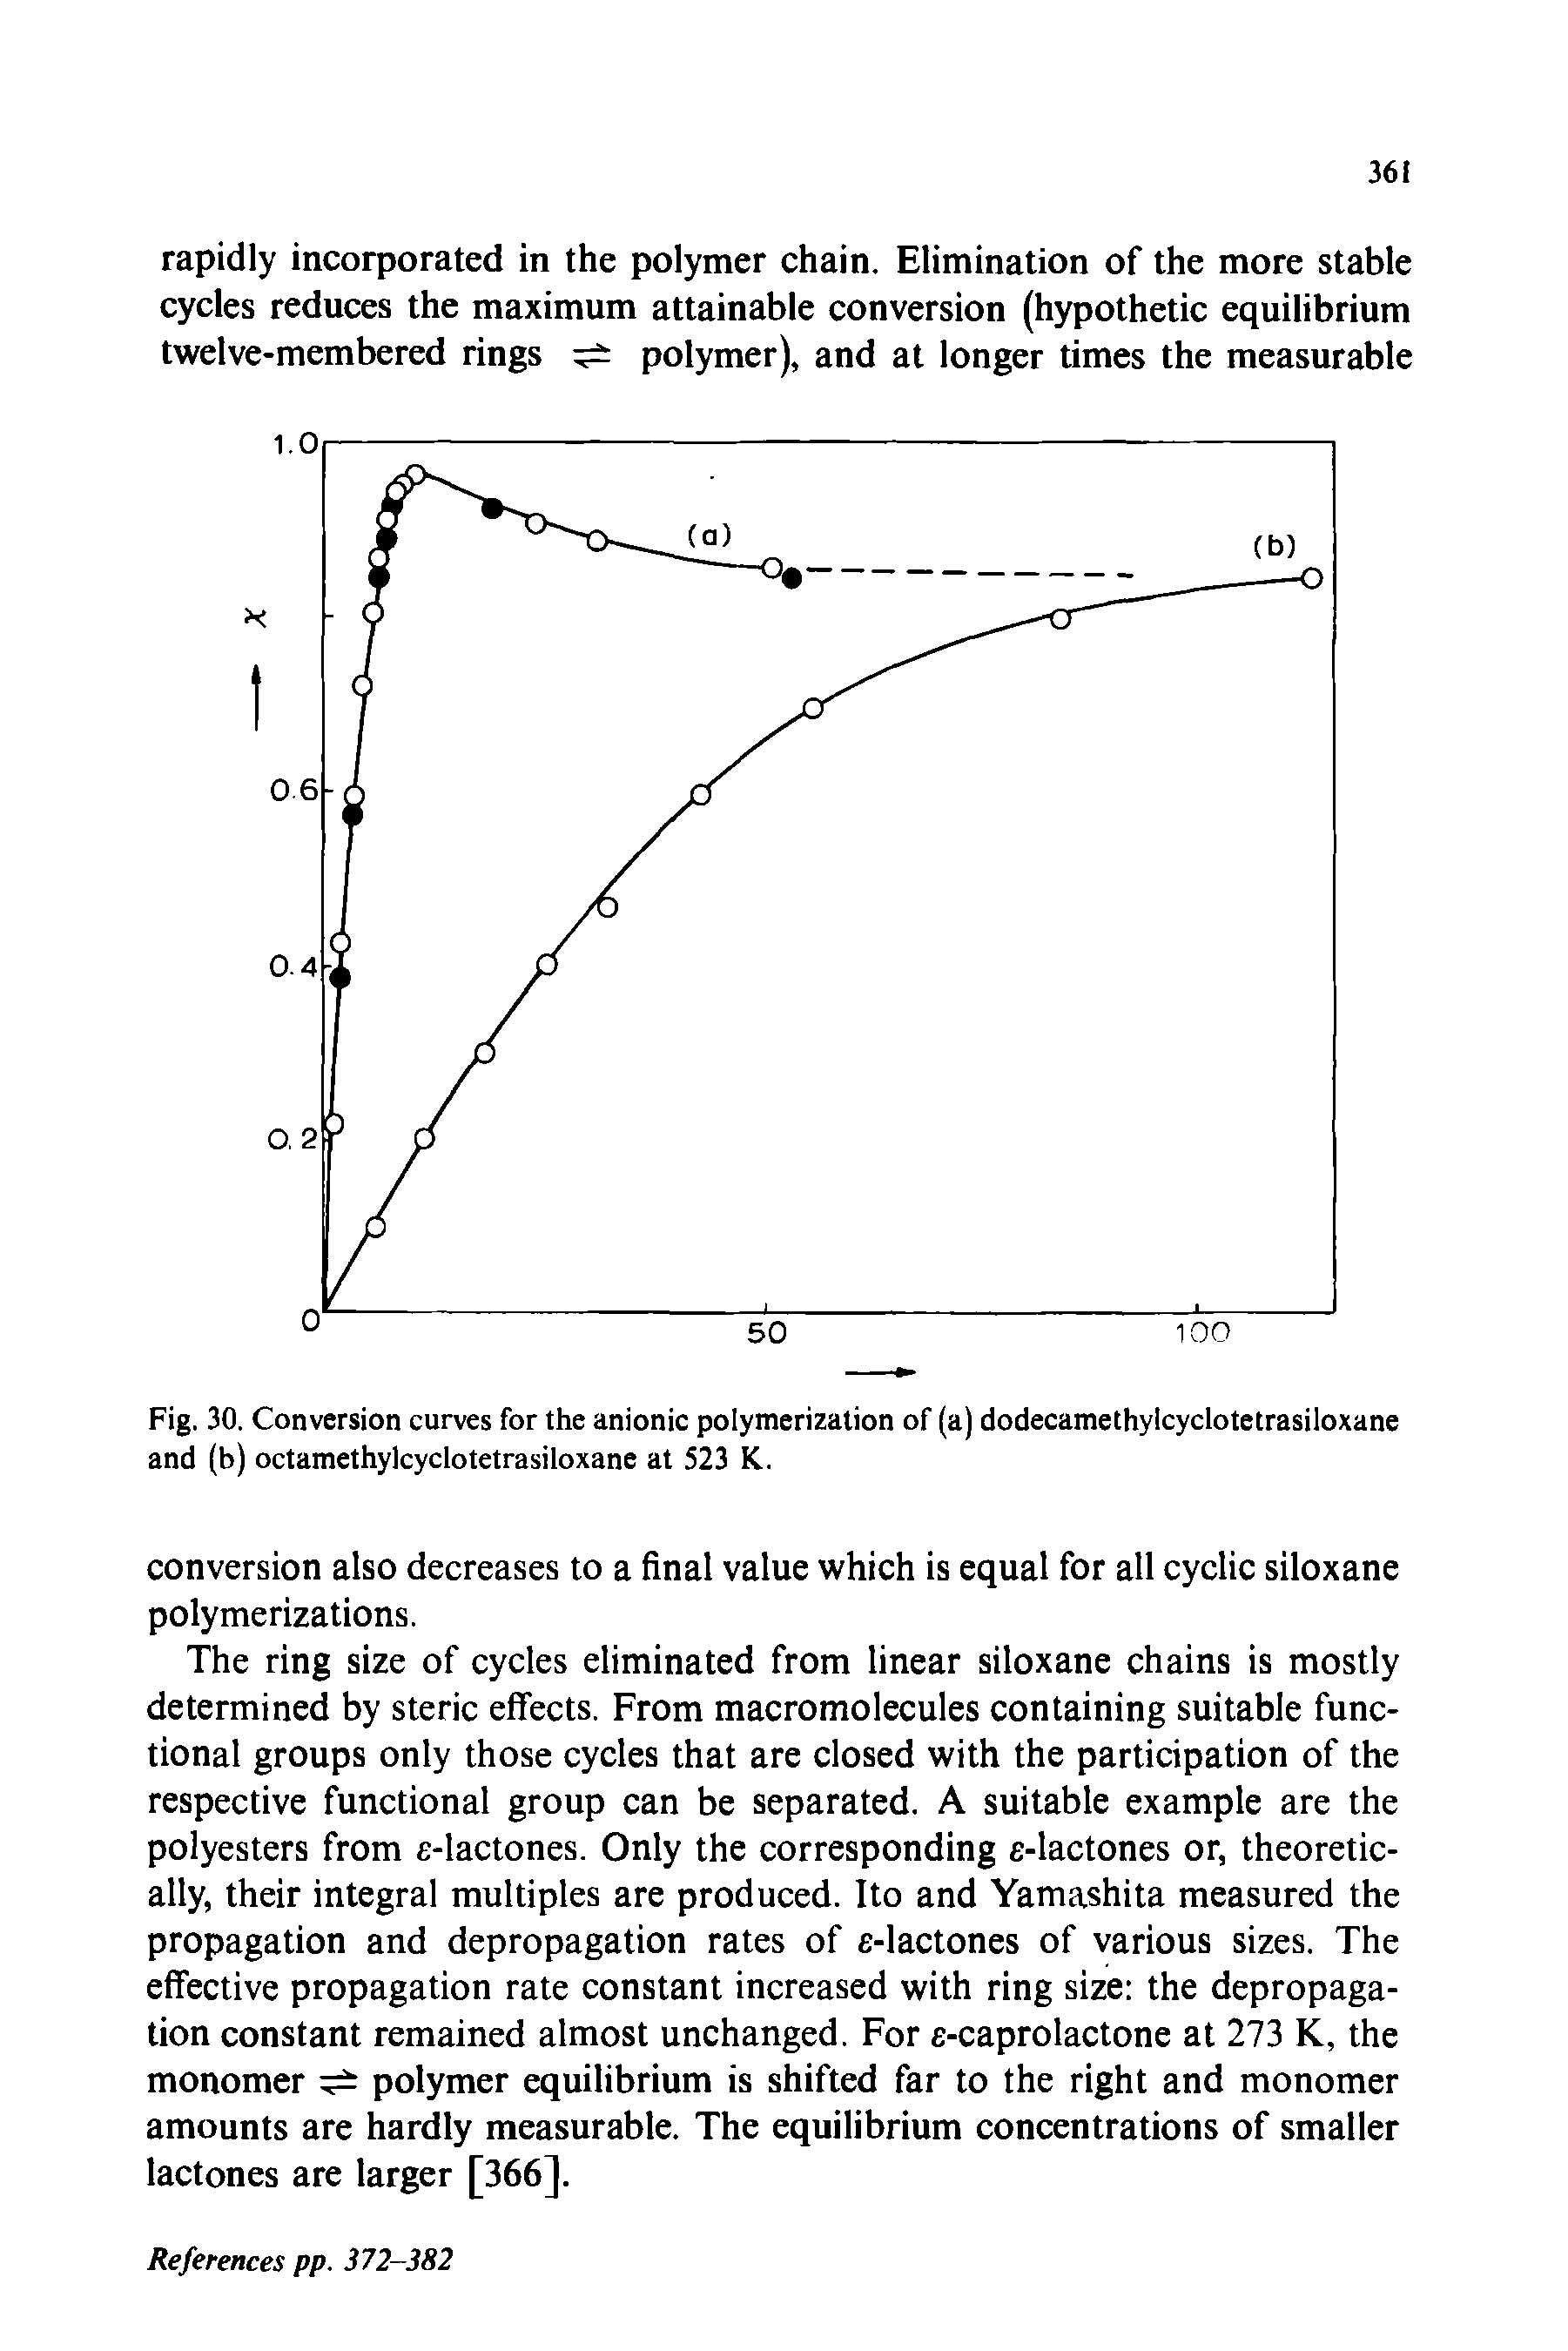 Fig. 30. Conversion curves for the anionic polymerization of (a) dodecamethylcyclotetrasiloxane and (b) octamethylcyclotetrasiloxane at 523 K.